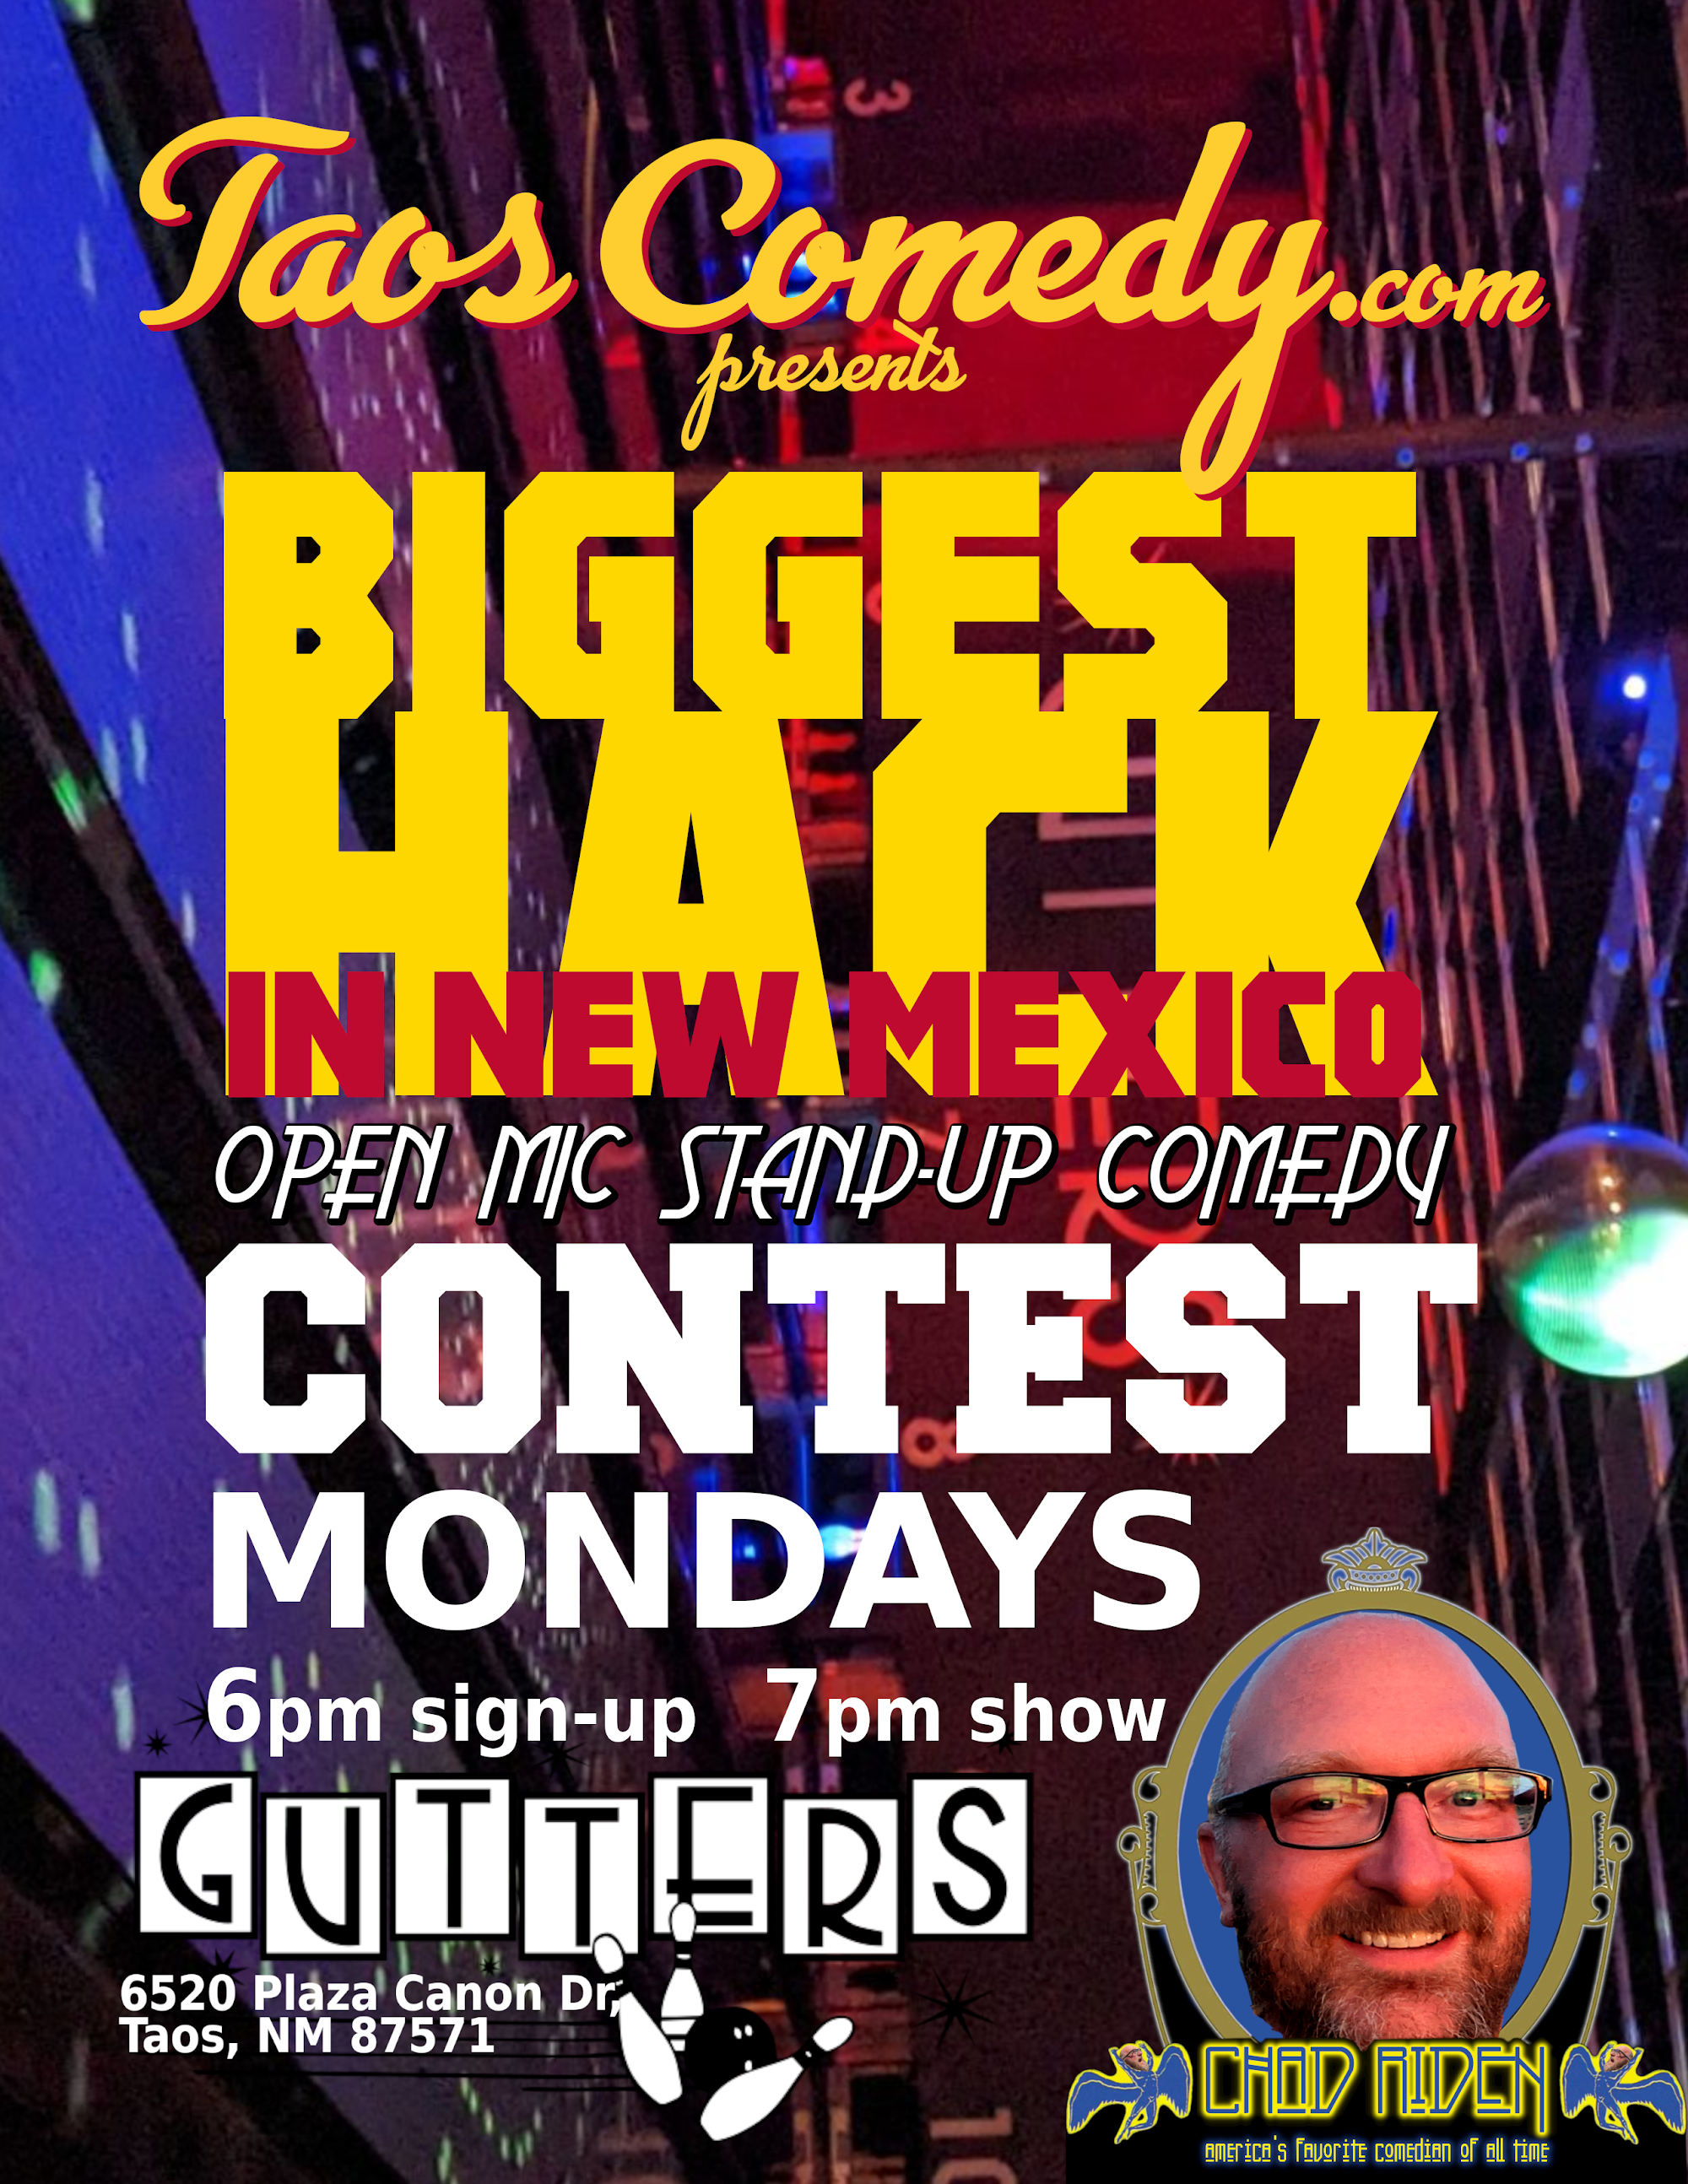 Biggest Hack in New Mexico open mic stand-up comedy contest MONDAYS at Gutters Taos Bowling